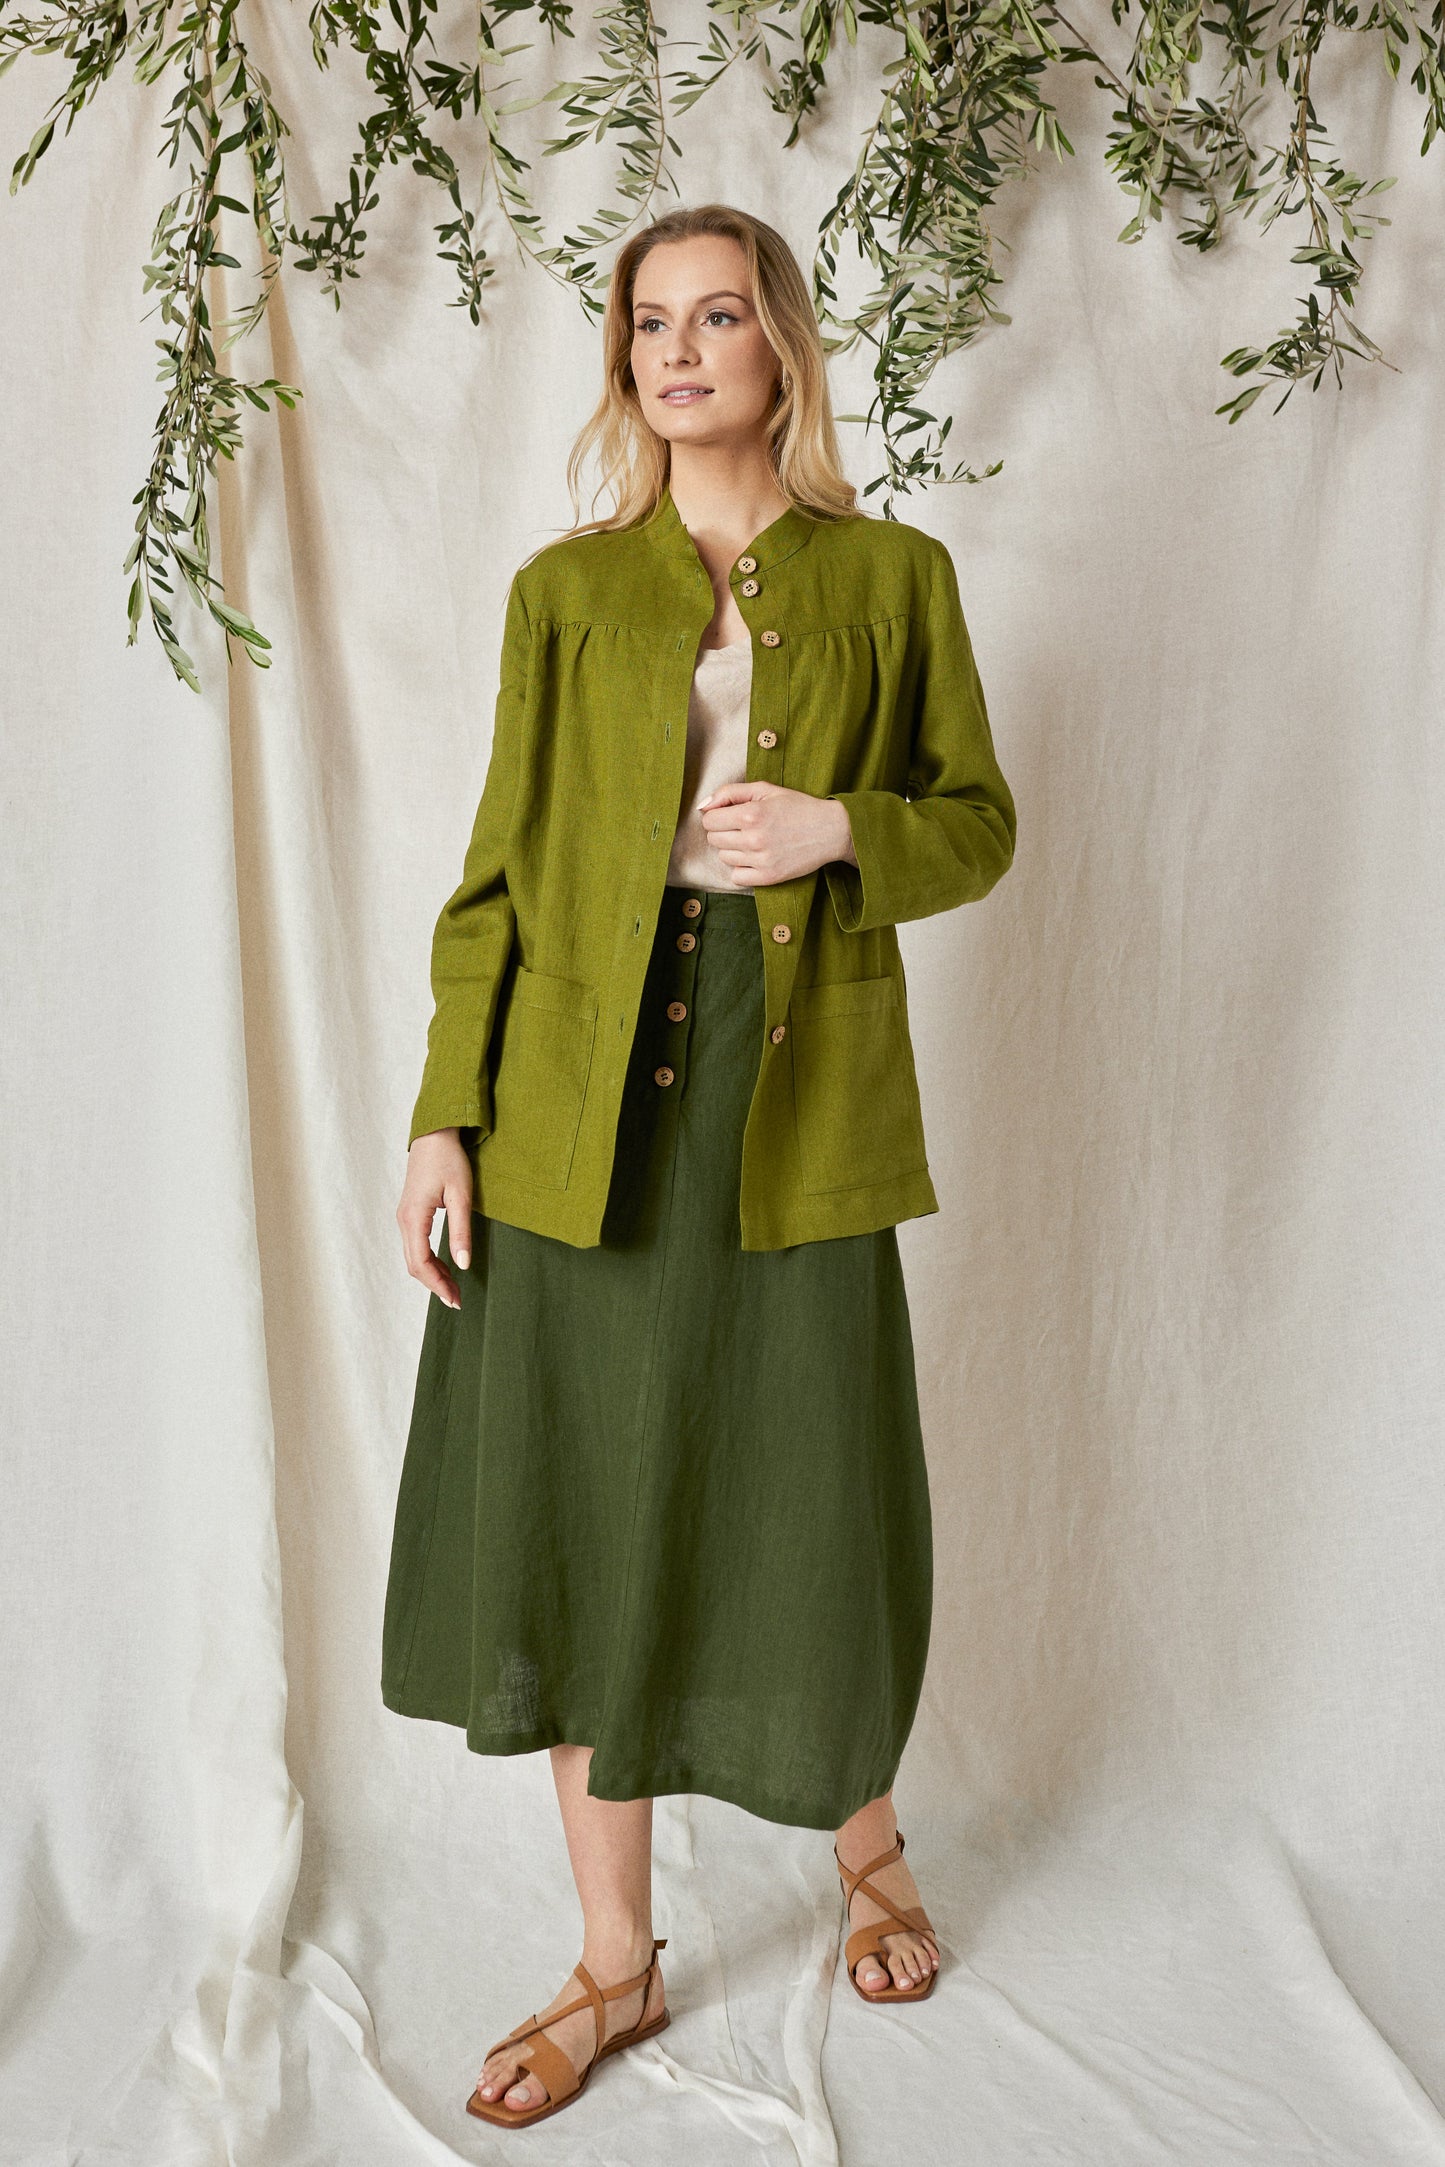 Linen Skirt CLEO in Green with Buttoned Front